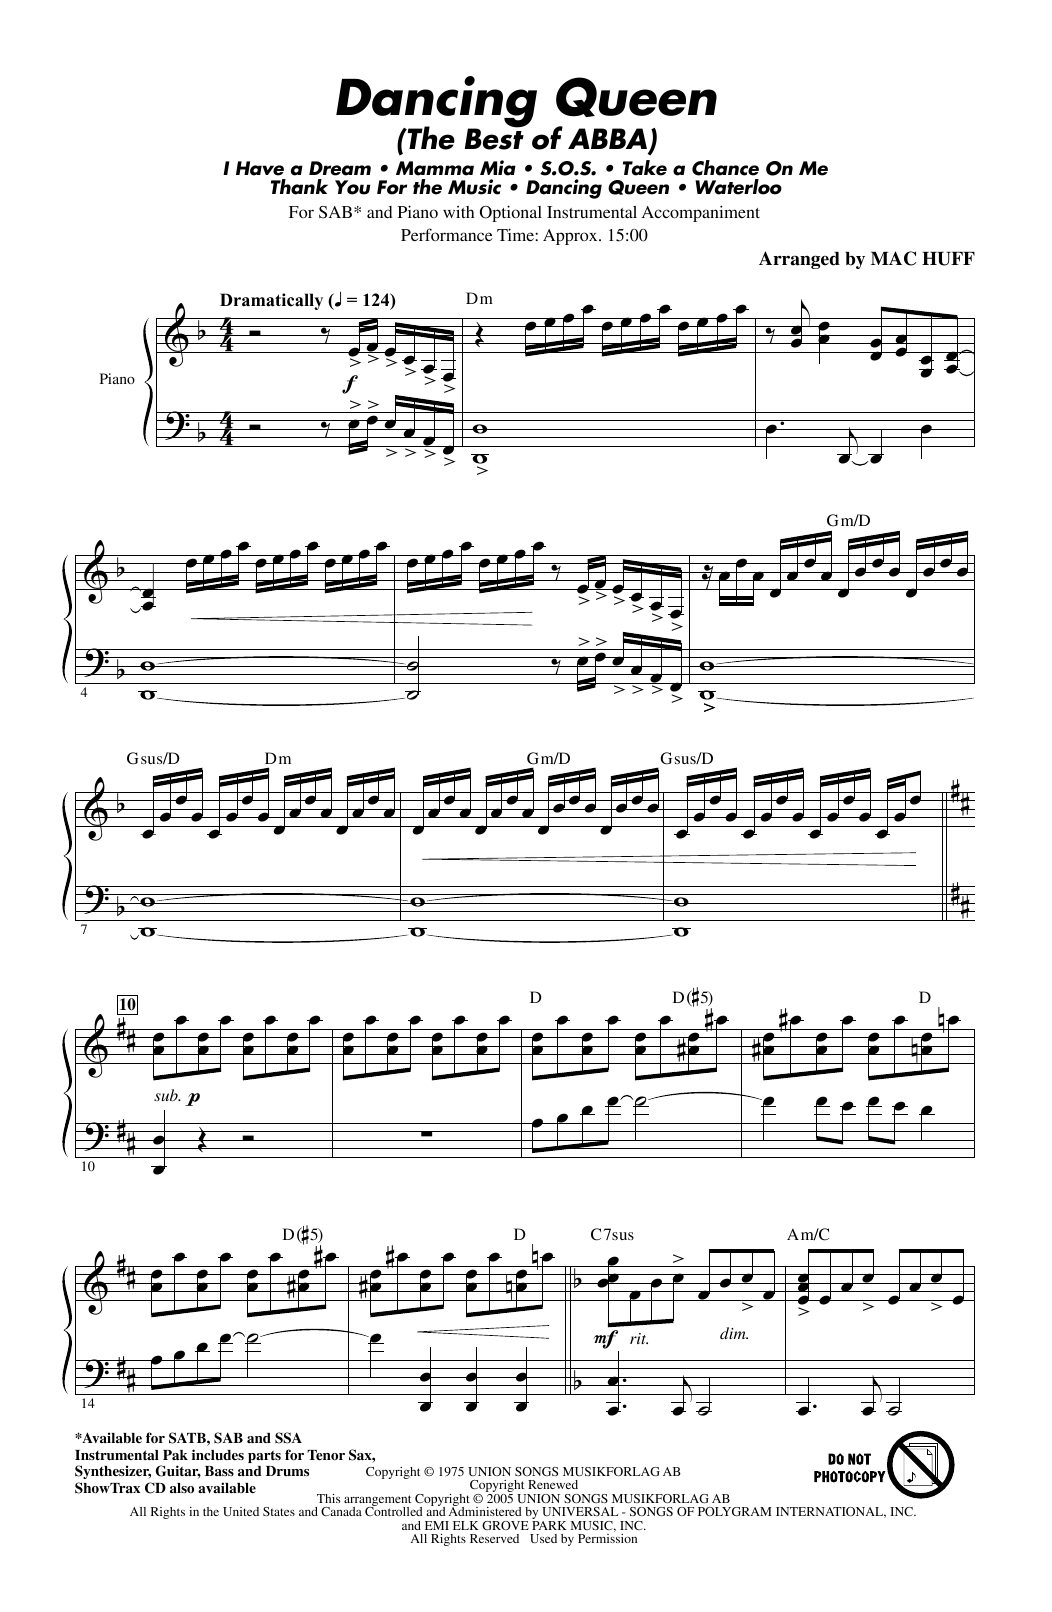 Abba Mamma Mia Highlights From The Movie Soundtrack Arr Mac Huff Sheet Music Pdf Notes Chords Film Tv Score Satb Choir Download Printable Sku 418980 See realtime chords on guitar, piano and ukulele as you are listening the song. abba mamma mia highlights from the movie soundtrack arr mac huff sheet music notes chords download printable satb choir pdf score sku